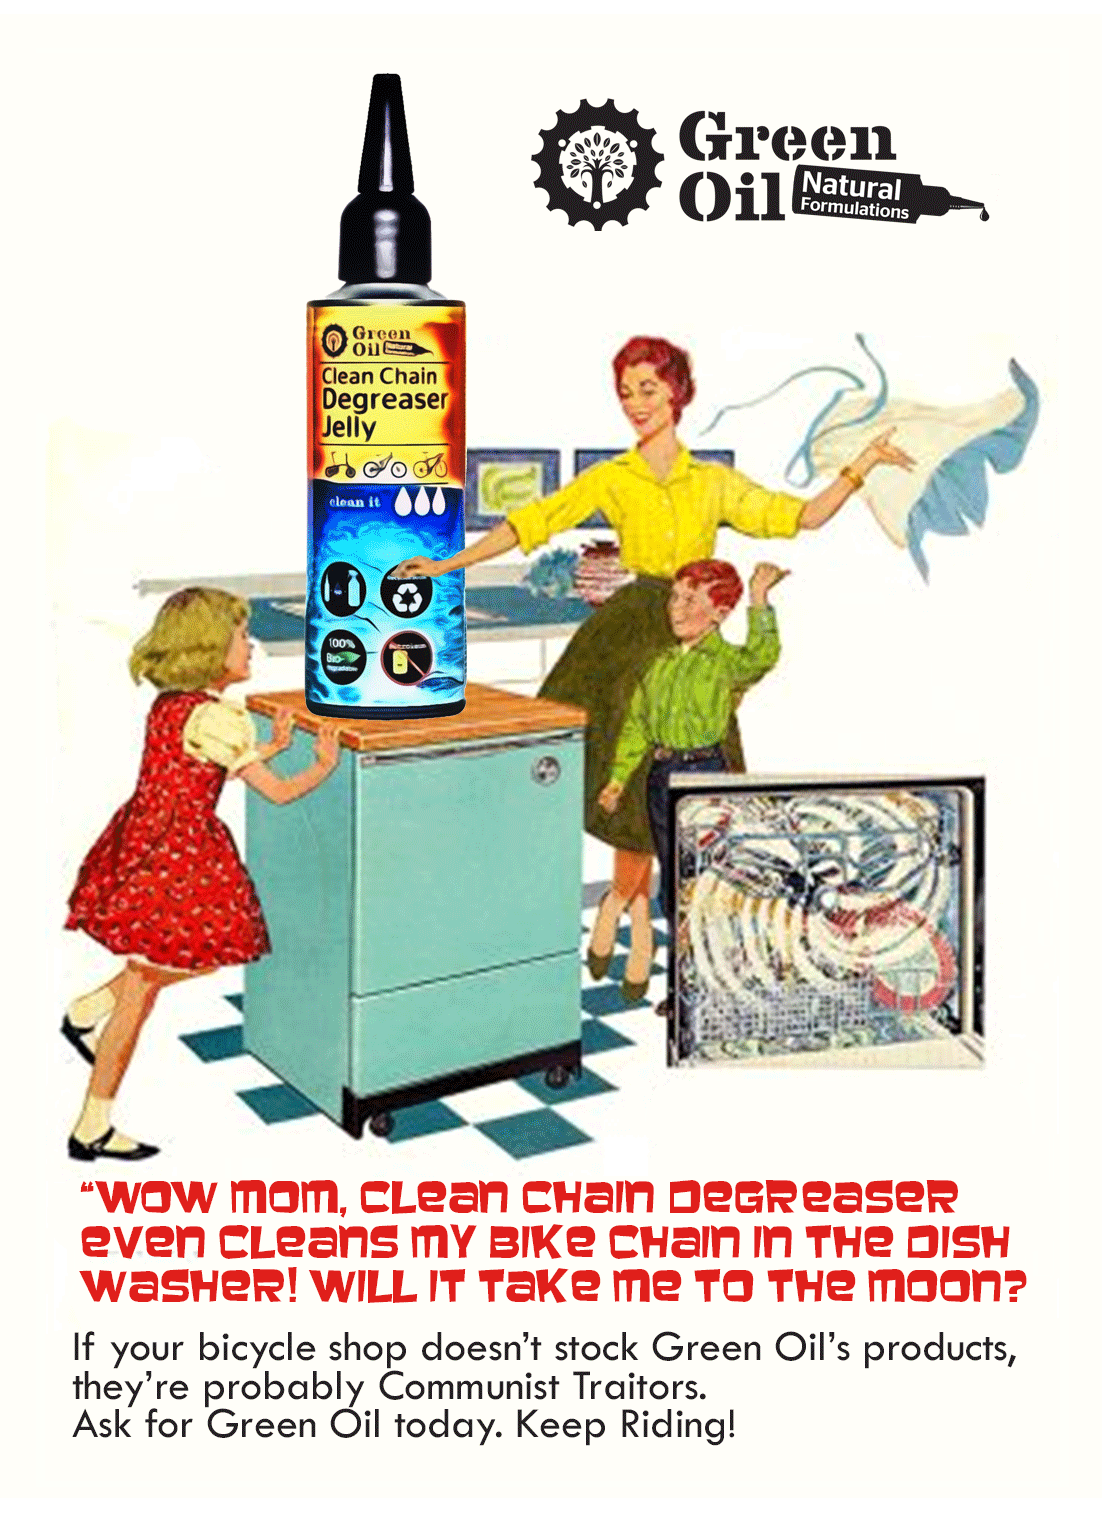 Clean Chain degreaser can be cleaned in a dishwasher